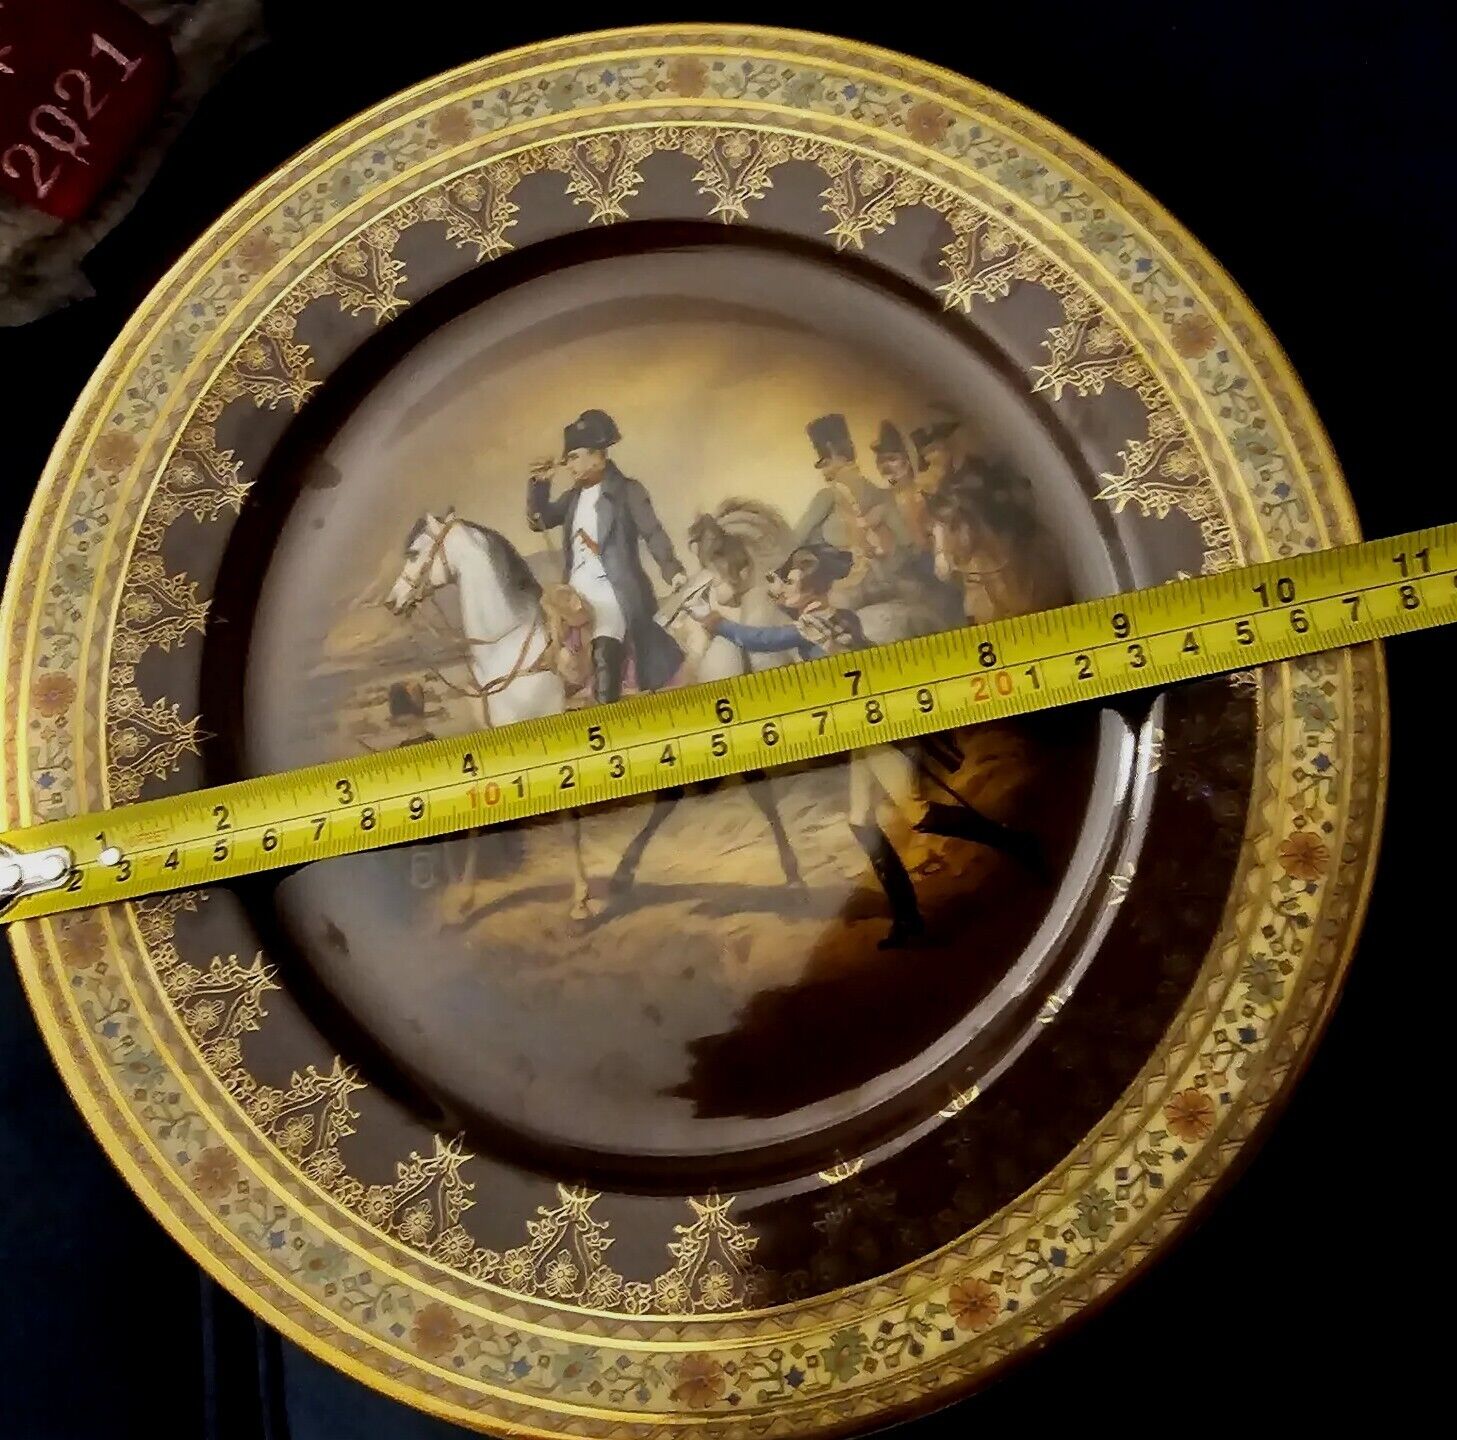  Napoleon Hand Painted Plate 11 Inch Porcelana Fina Antique